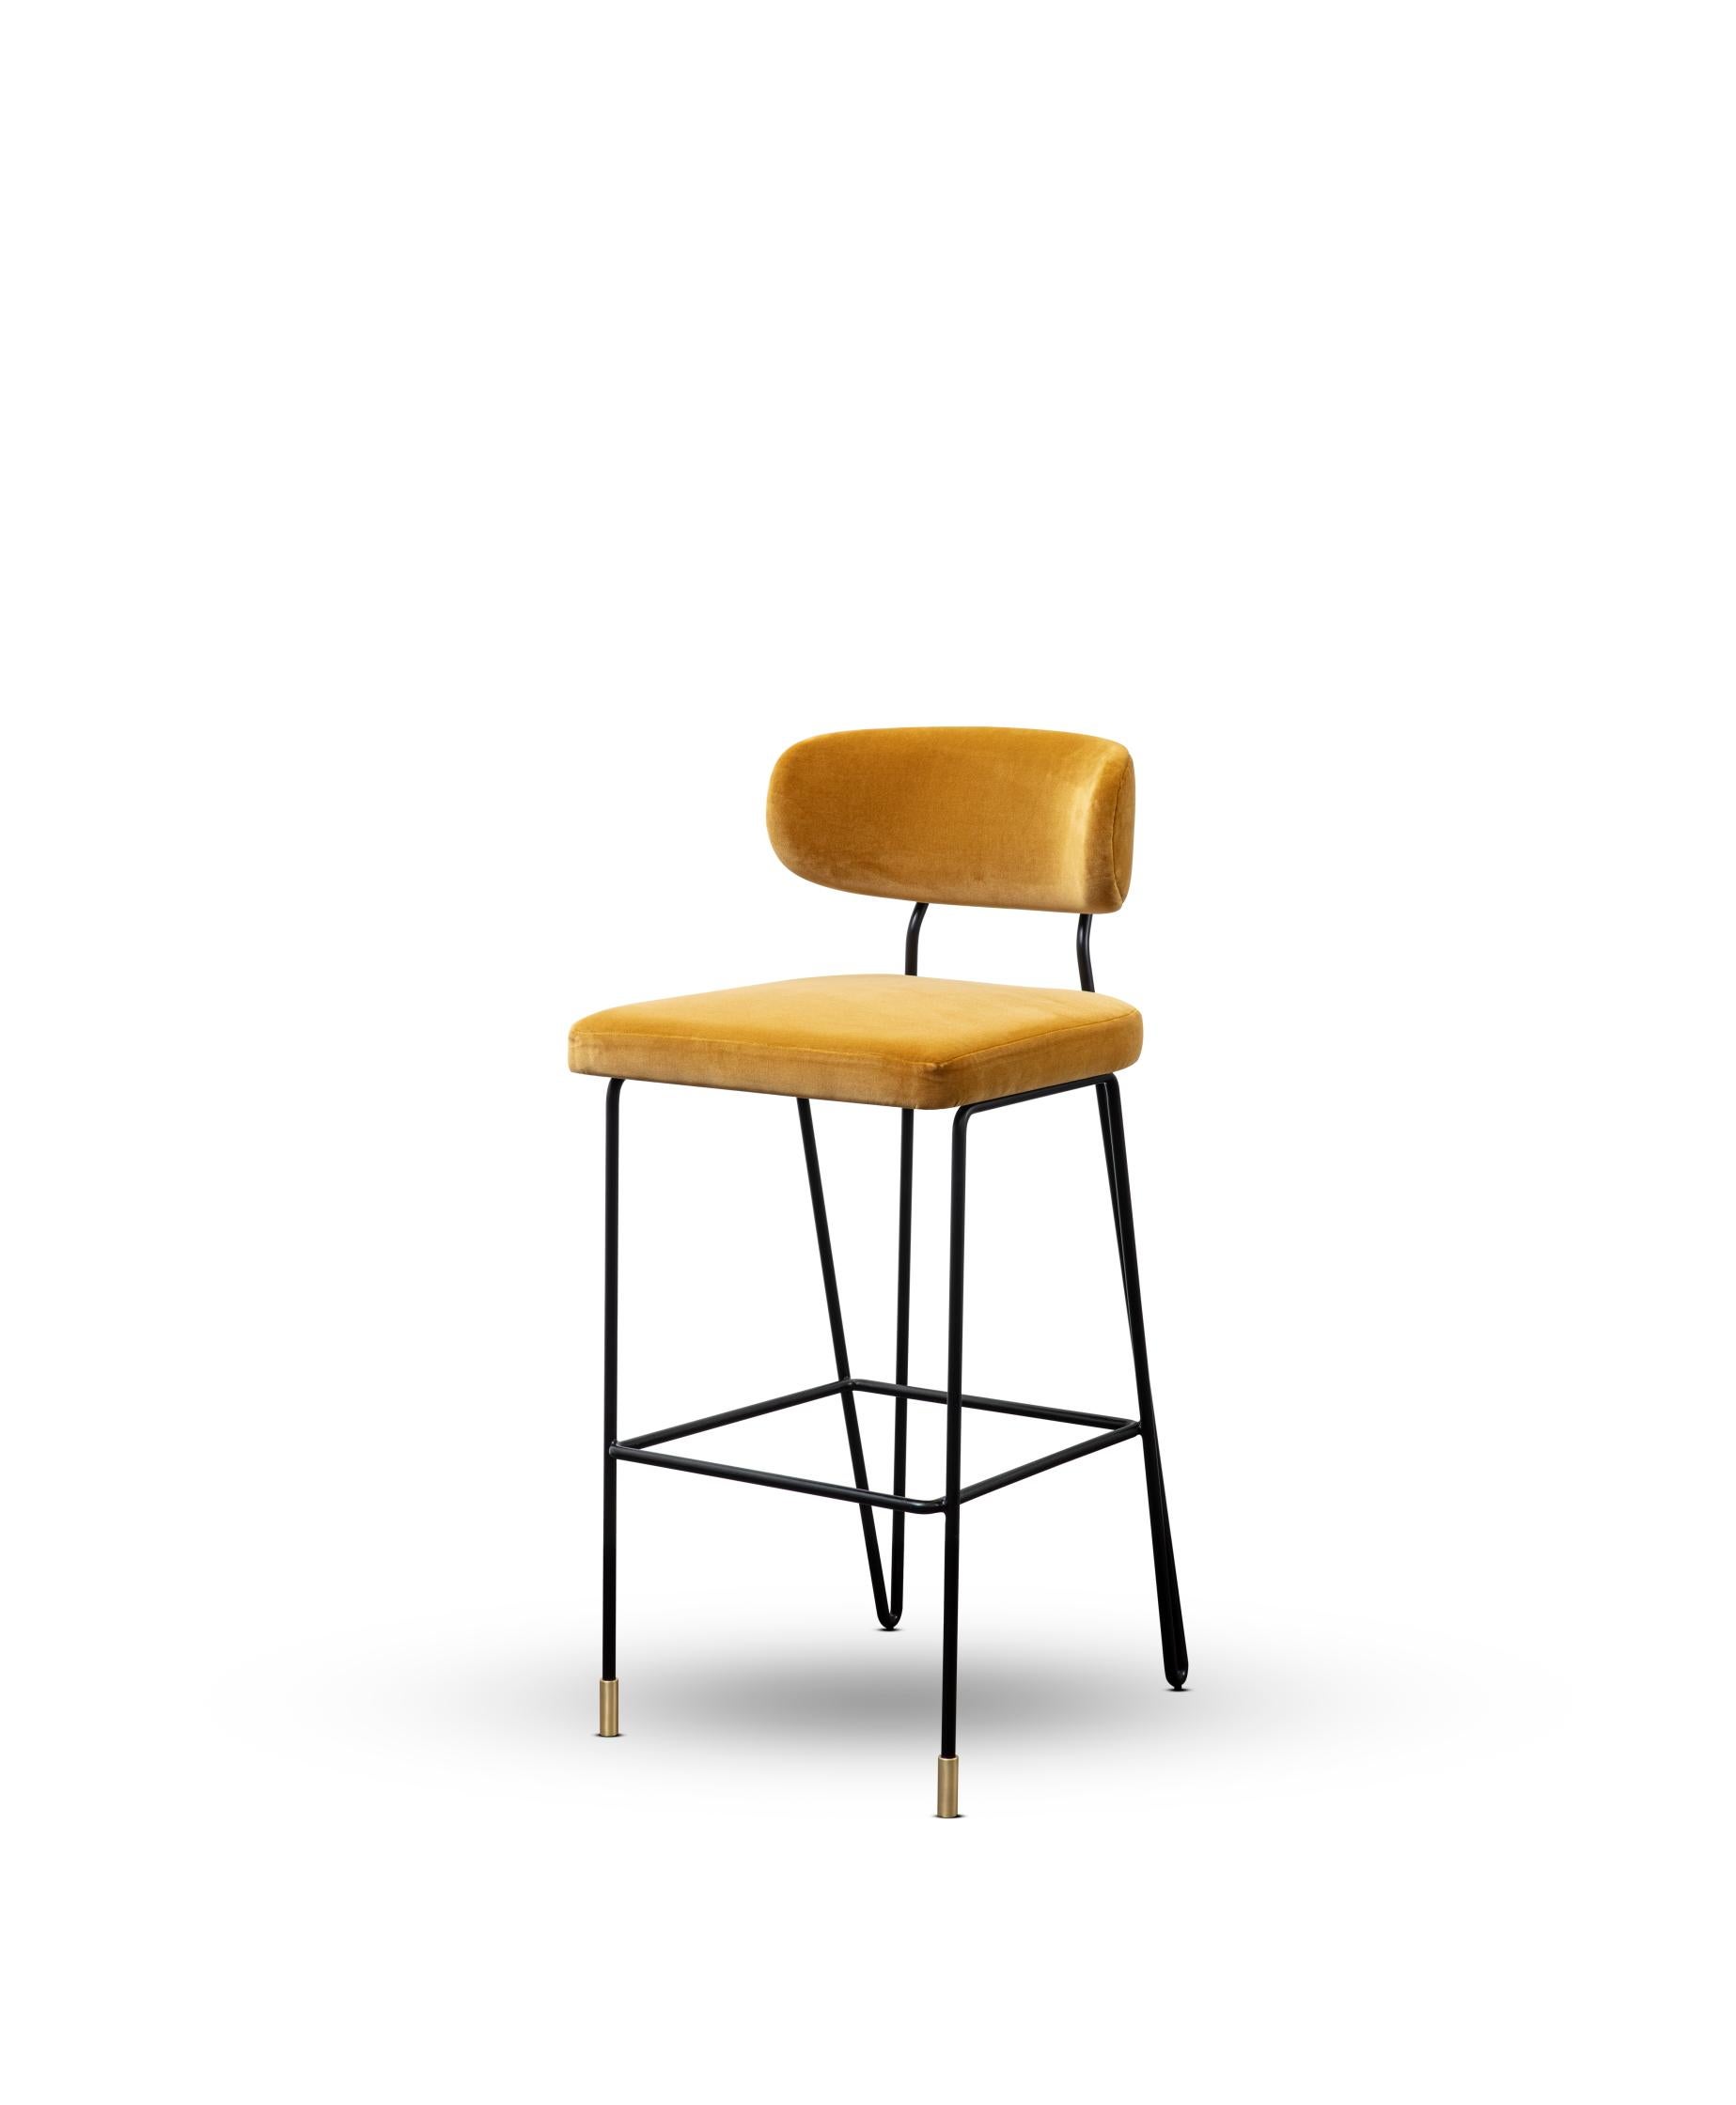 Apollo Bar Stool by Duistt
Dimensions: W 47 x D 52 x H 105 cm
Materials: Duistt Fabric, Matte Black Lacquered Iron Structure, Brushed Brass Details

Combining high levels of comfort and style, the Apollo bar stool, crafted with great attention to